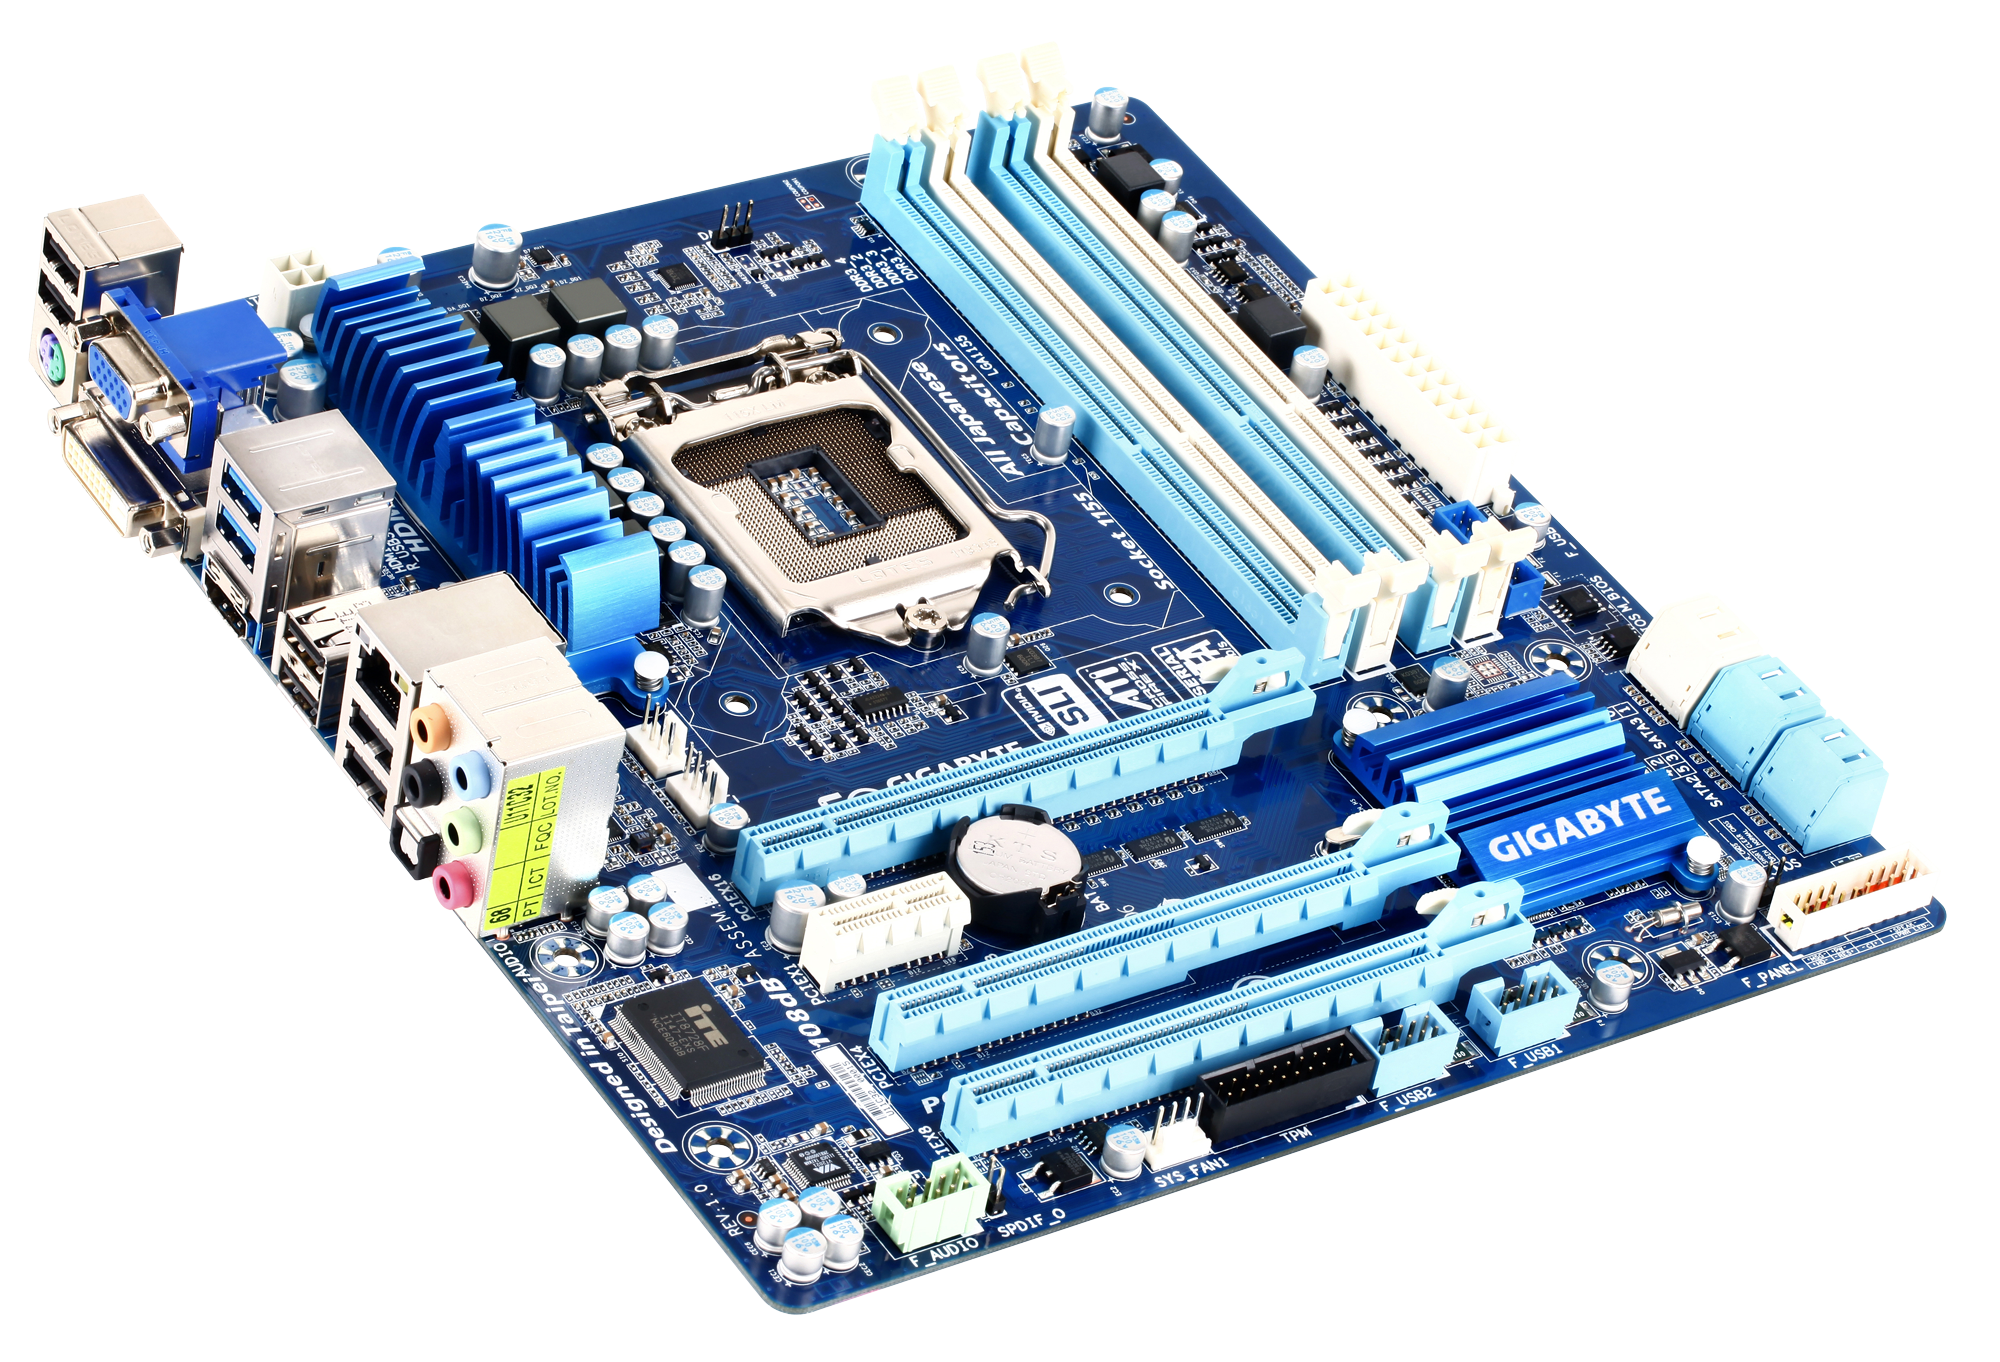 Gigabyte GA-Z77MX-D3H - Intel Z77 Panther Point Chipset and Motherboard Preview - ASRock, ASUS 